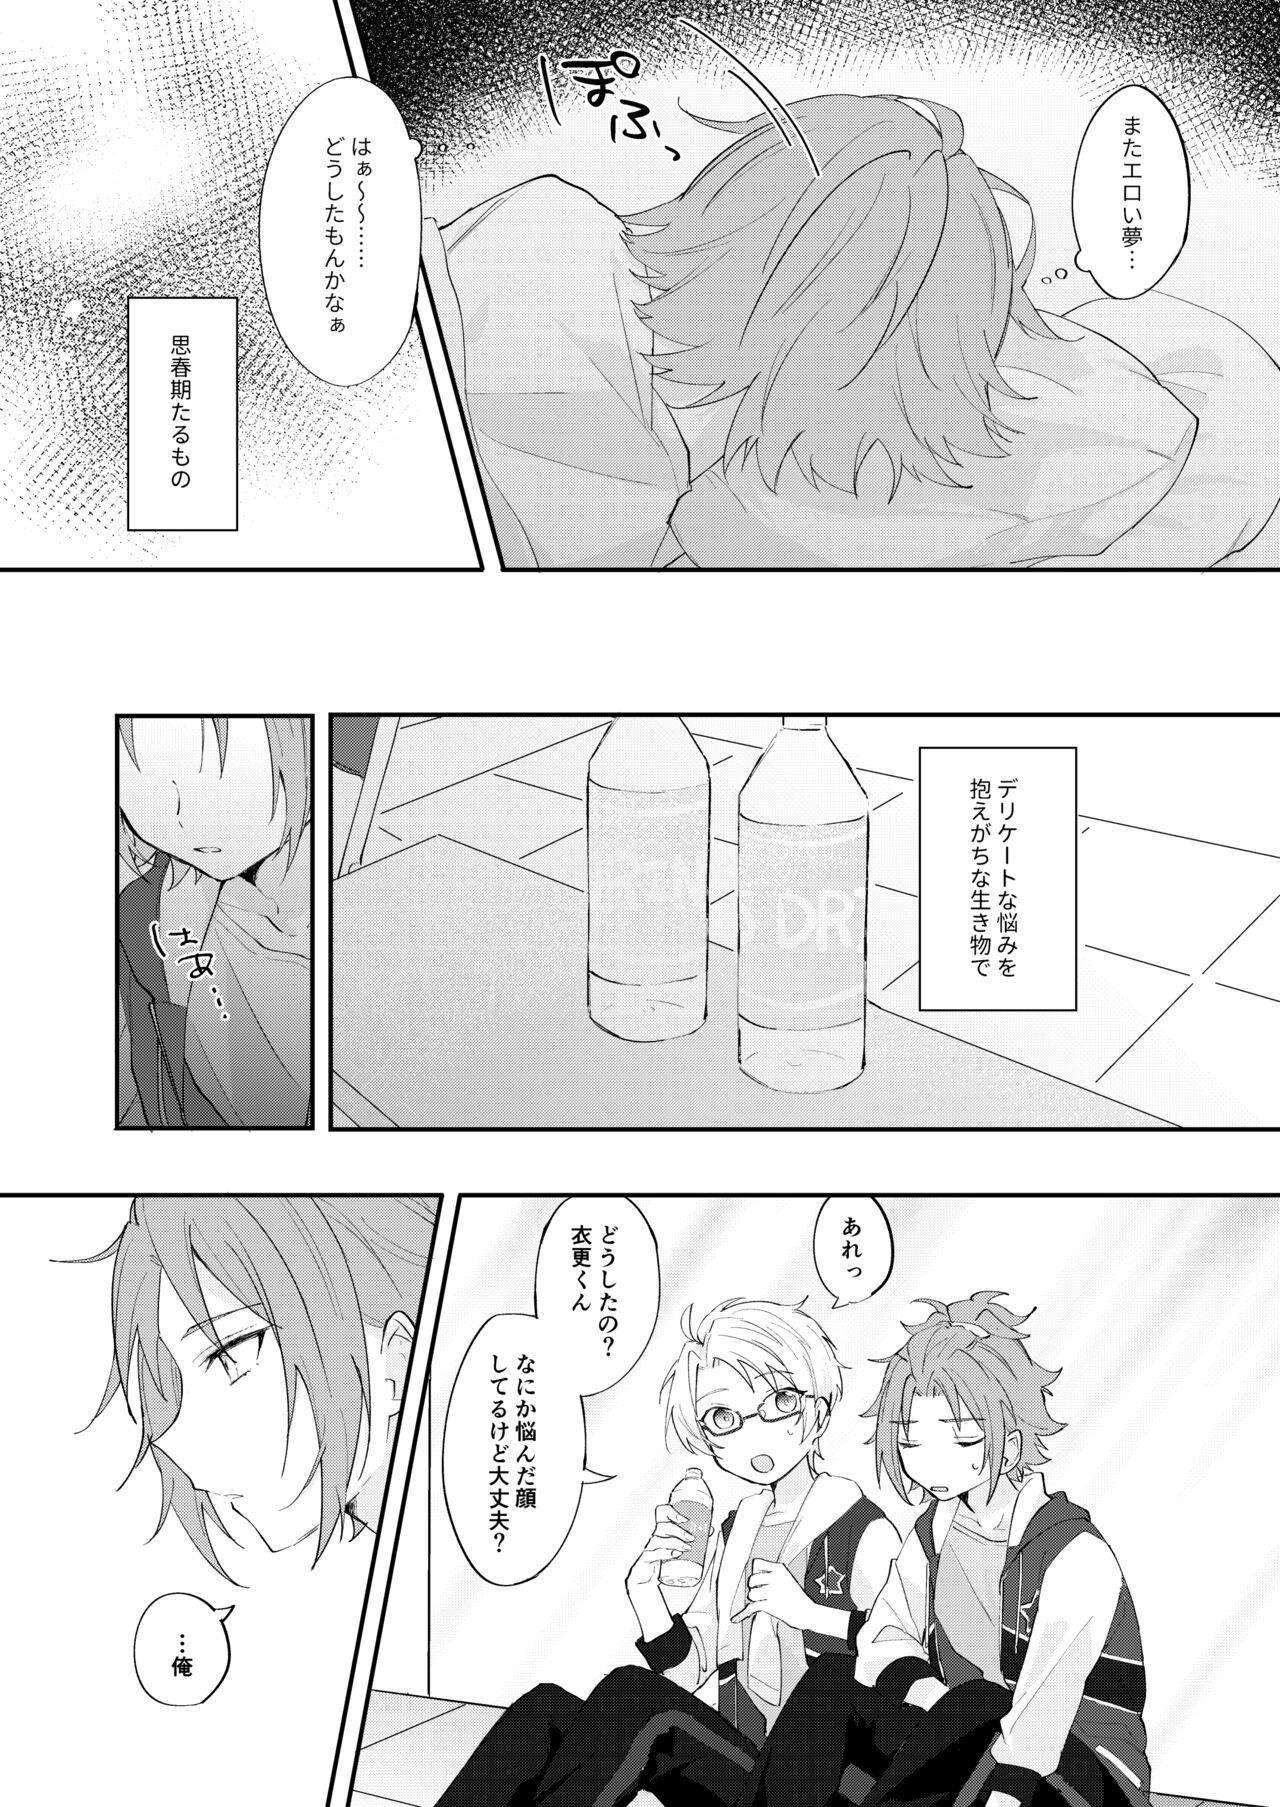 Collar POPPIN' KISS - Ensemble stars Doctor Sex - Page 3